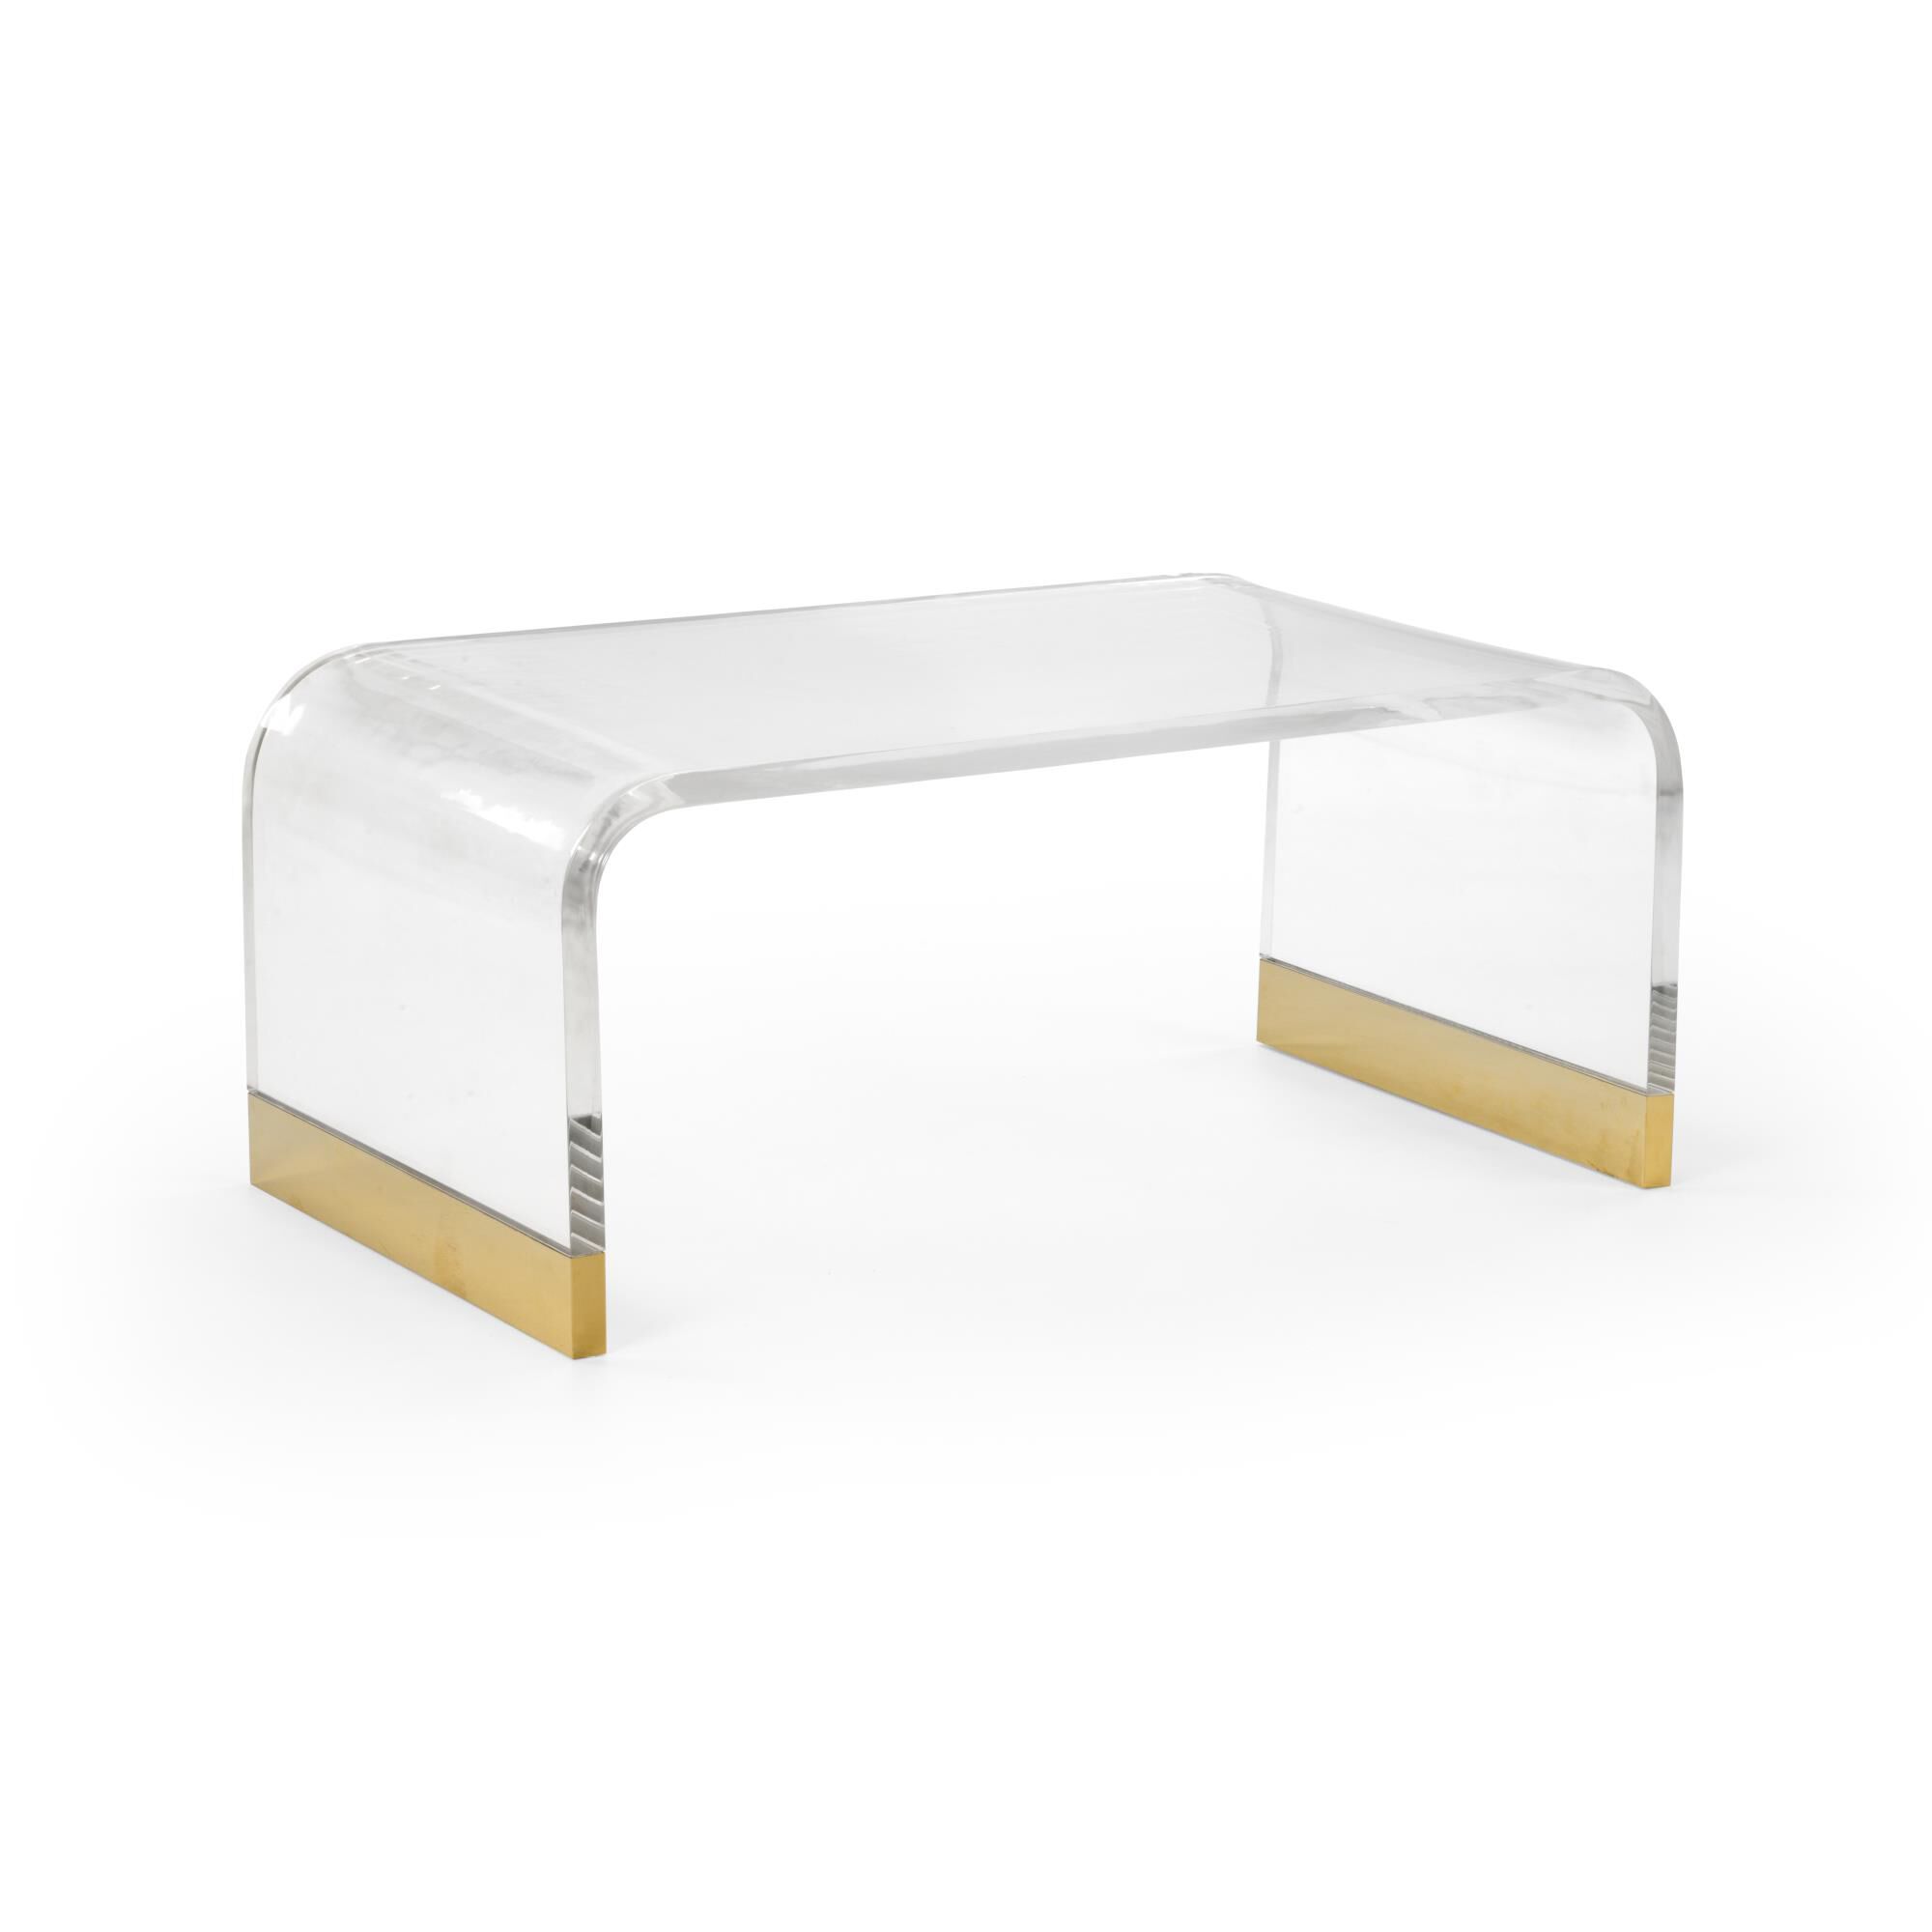 Waterfall Coffee Table by Chelsea House | Capitol Lighting 1800lighting.com